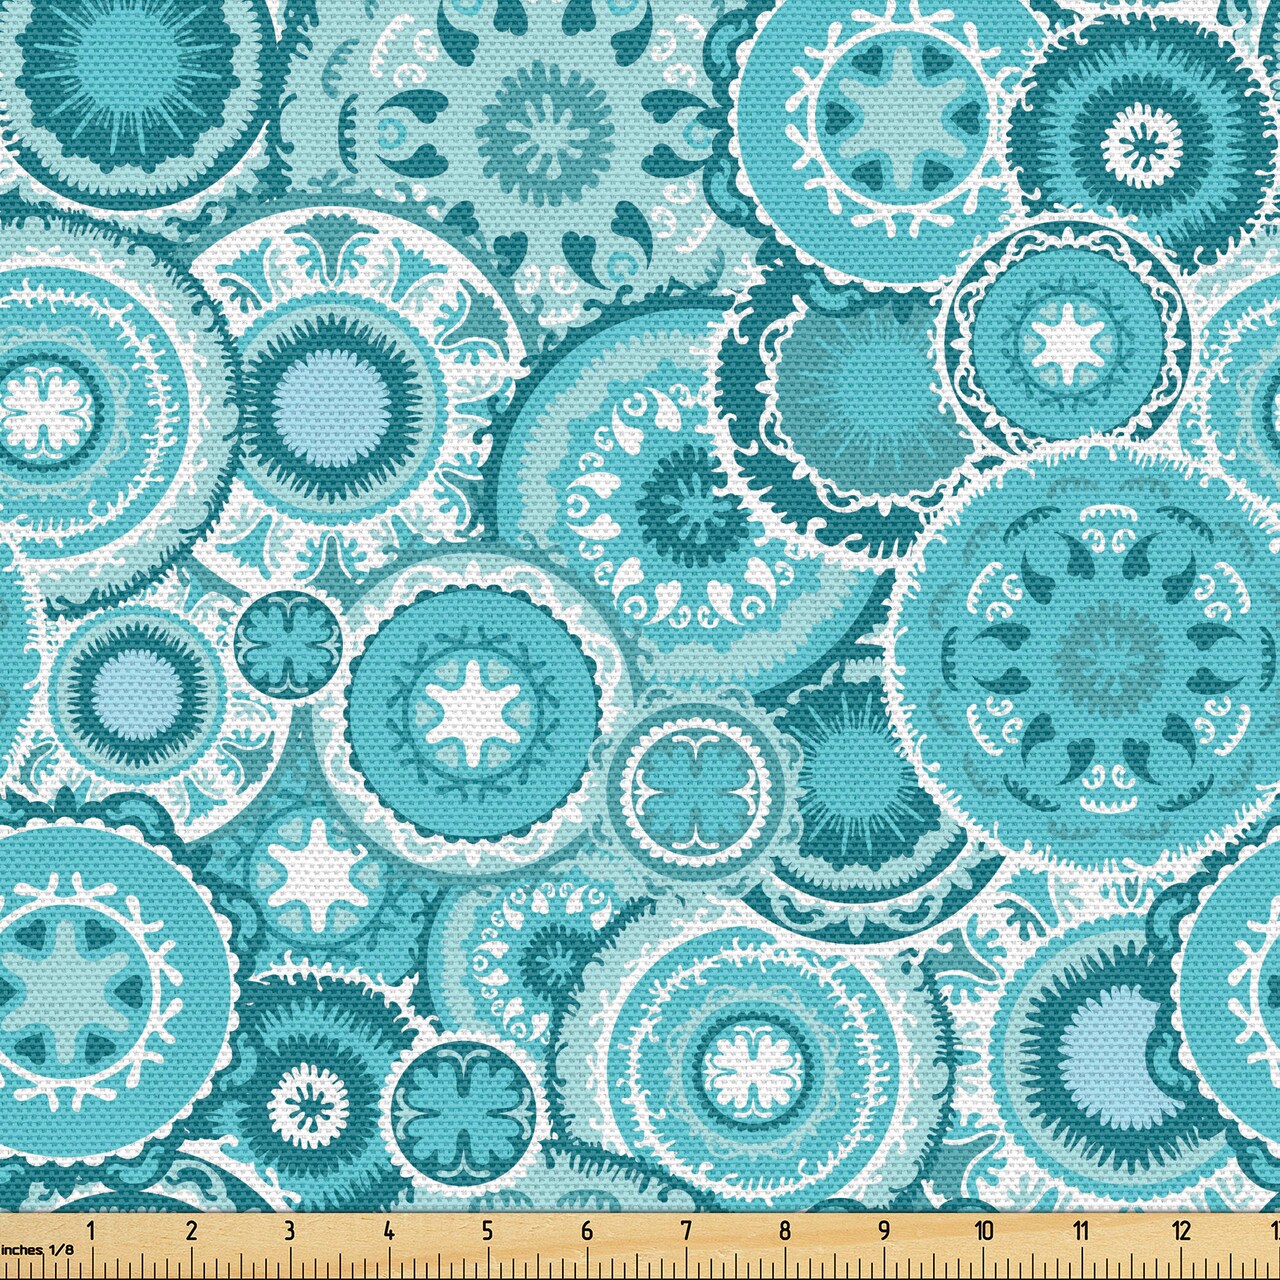 Ambesonne Aqua Fabric by the Yard, Hippie Floral Leaves Mandala Rounds Traditional Elements Print, Decorative Fabric for Upholstery and Home Accents, 10 Yards, Turquoise Teal White